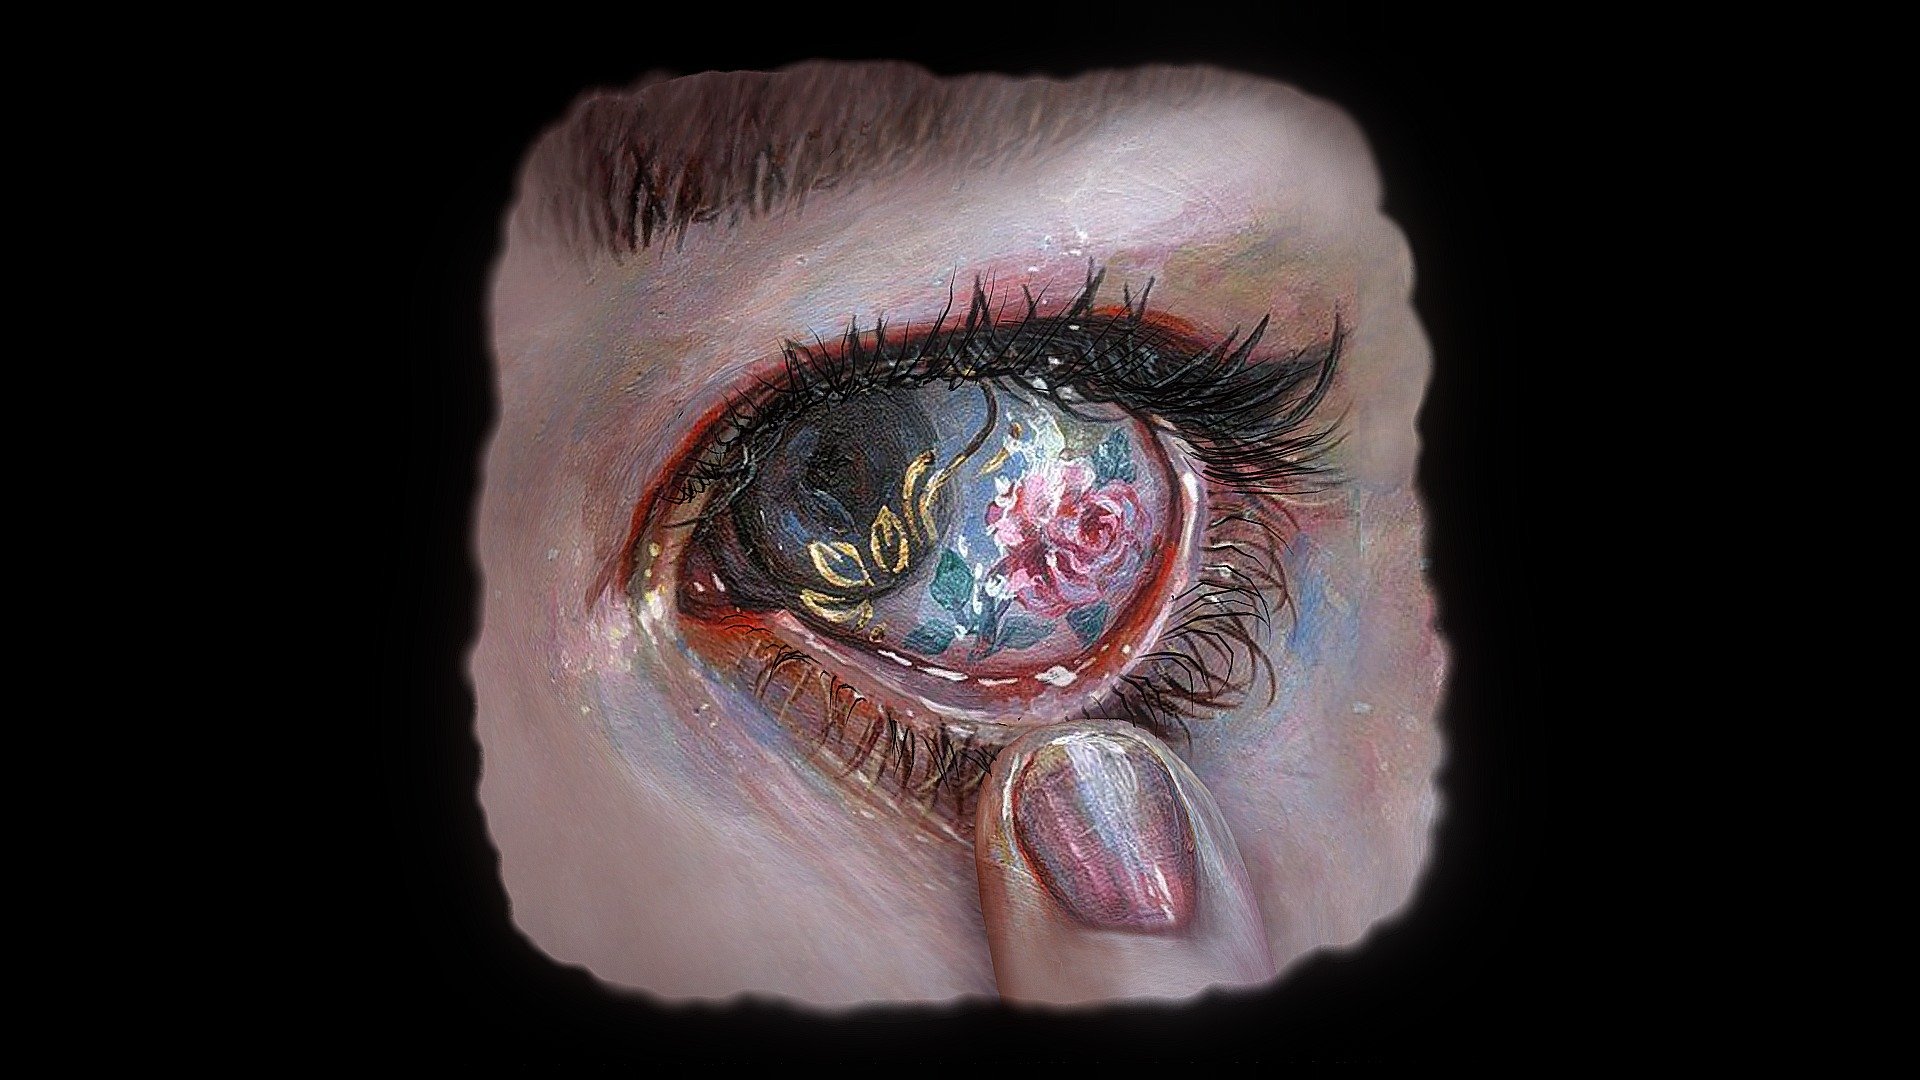 3d aestethic eye that i just made randomly :)

I was scrolling through Pinterest and saw this beautiful drawing and decided to 3D it in Blender
https://www.pinterest.com/pin/648025833904405169/

.

I was looking for the artist of this beautiful painting, but I couldn't find him/her

So if you know the @ of the artist just tell me so I can put it in the caption

made in blender by #zirodesign #alisafarpour - aestethic eye - Buy Royalty Free 3D model by ZIRODESIGN 3d model